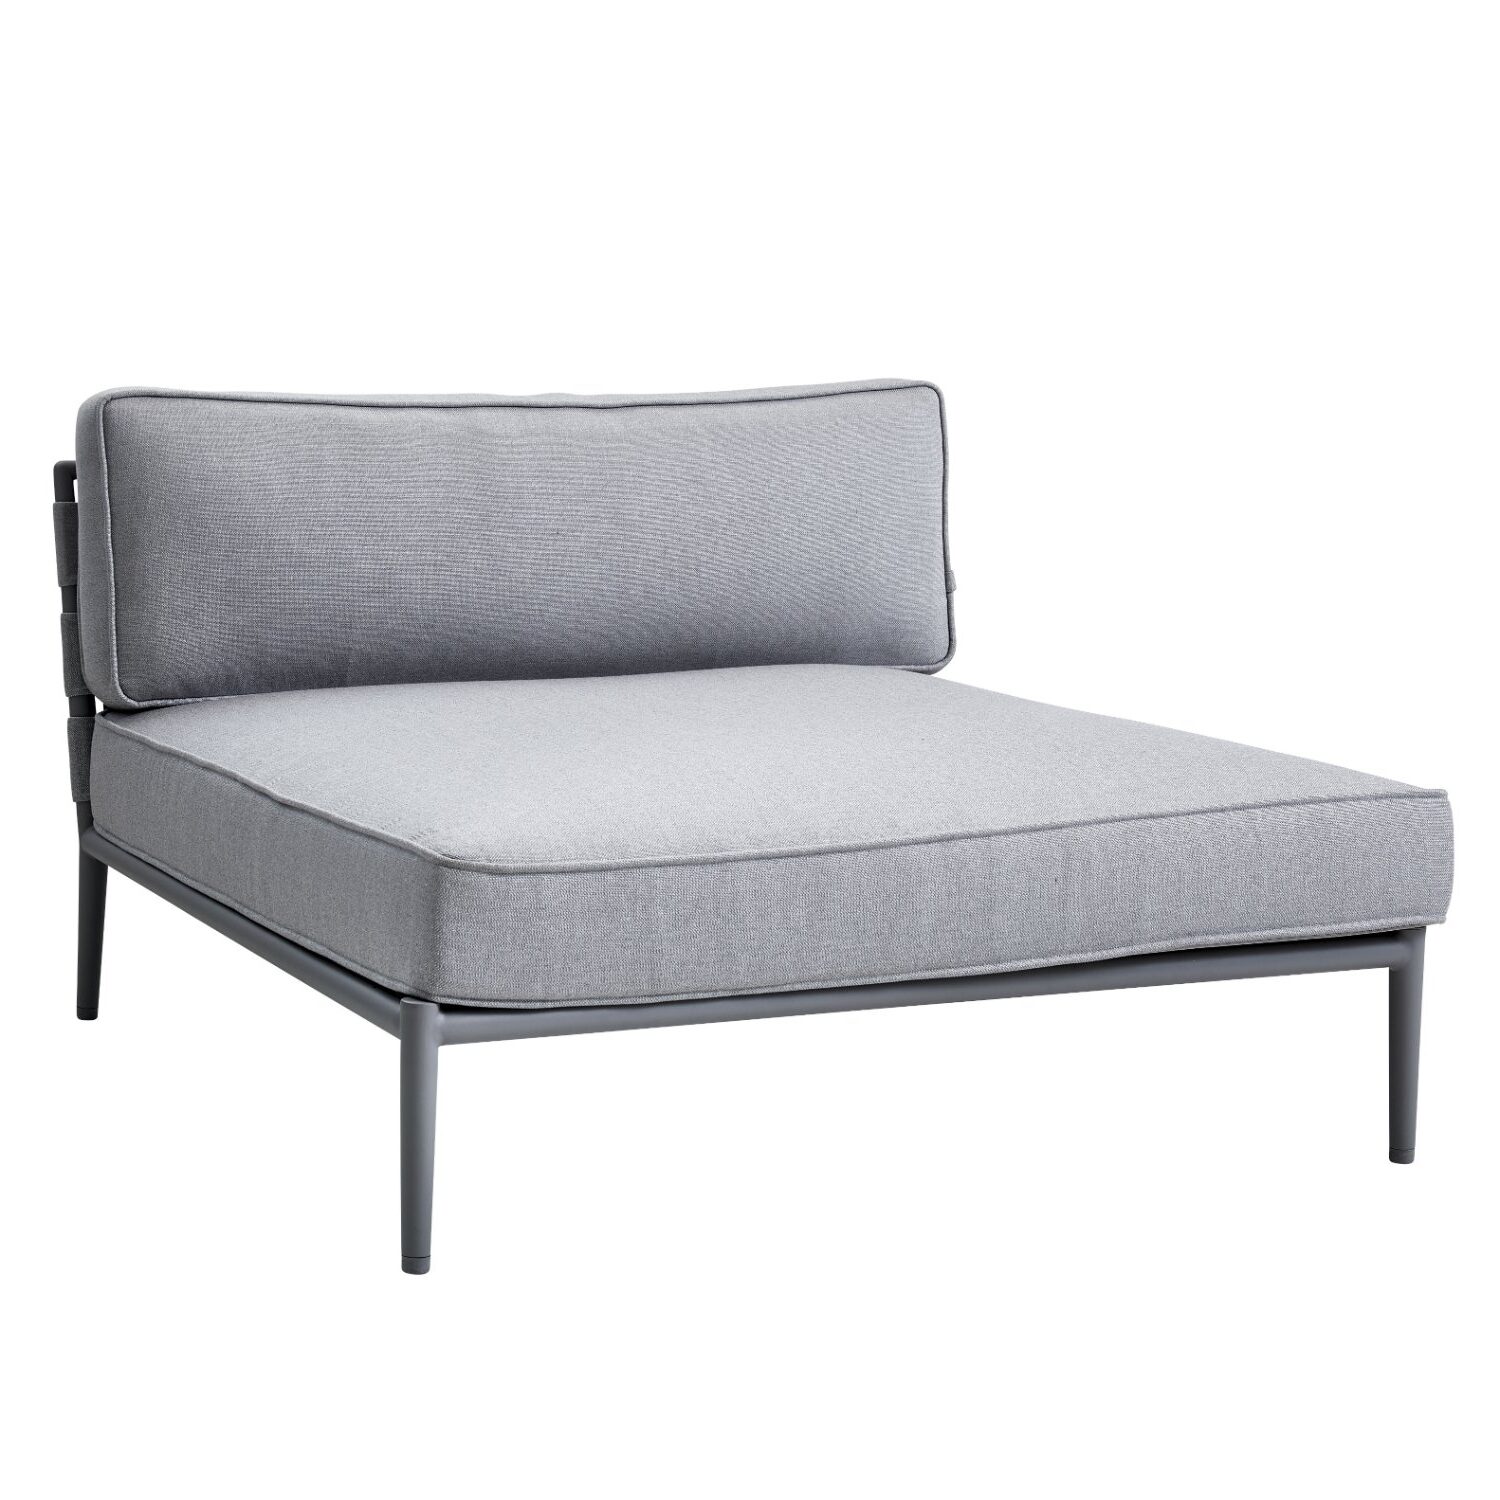 Cane-line "Conic" Daybed mit AirTouch-Kissen hellgrau